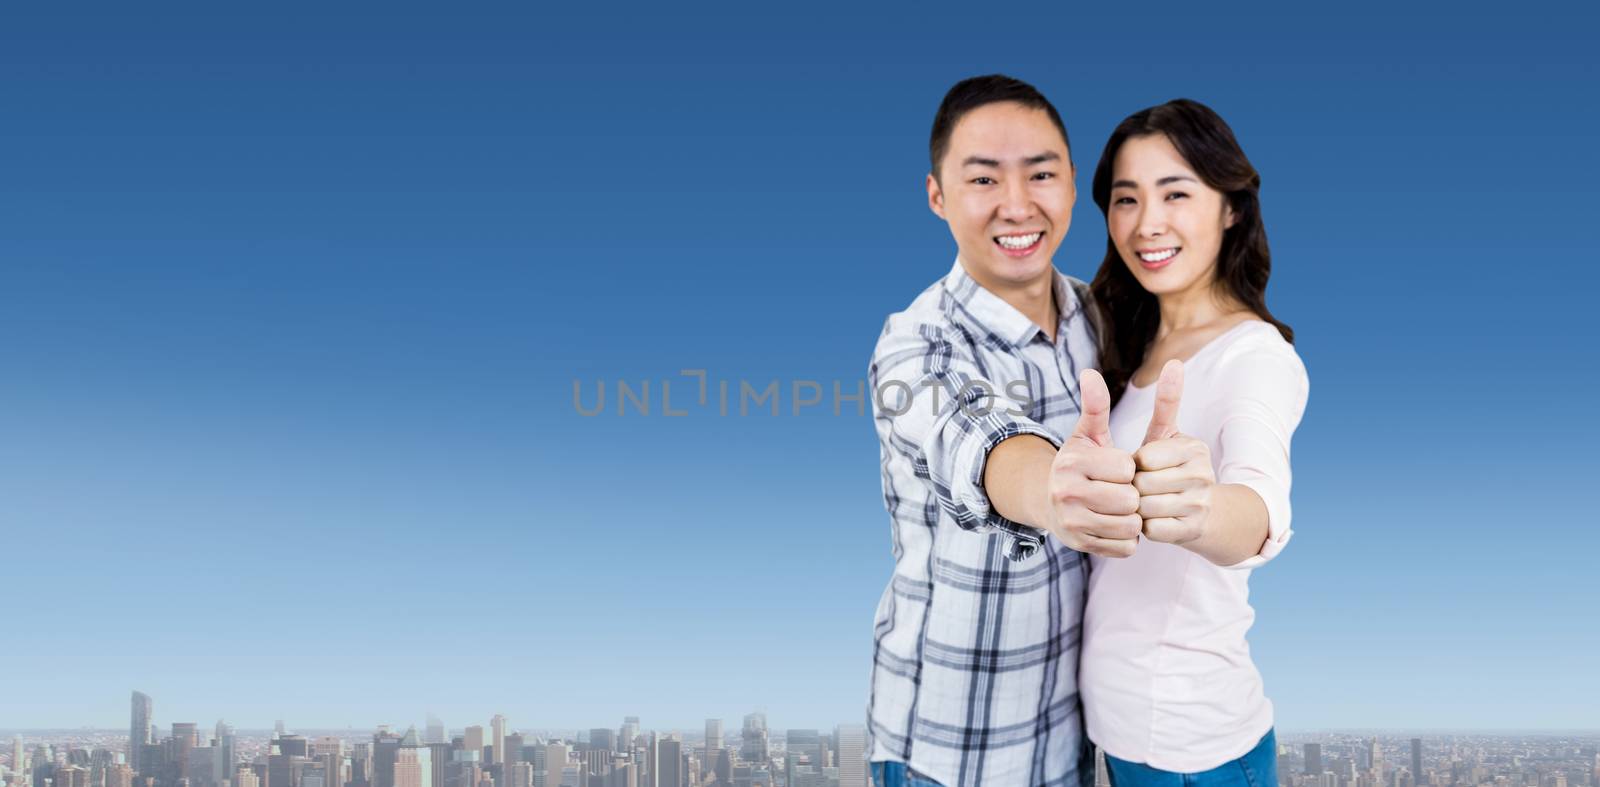 Happy couple showing thumbs up against white background against cityscape